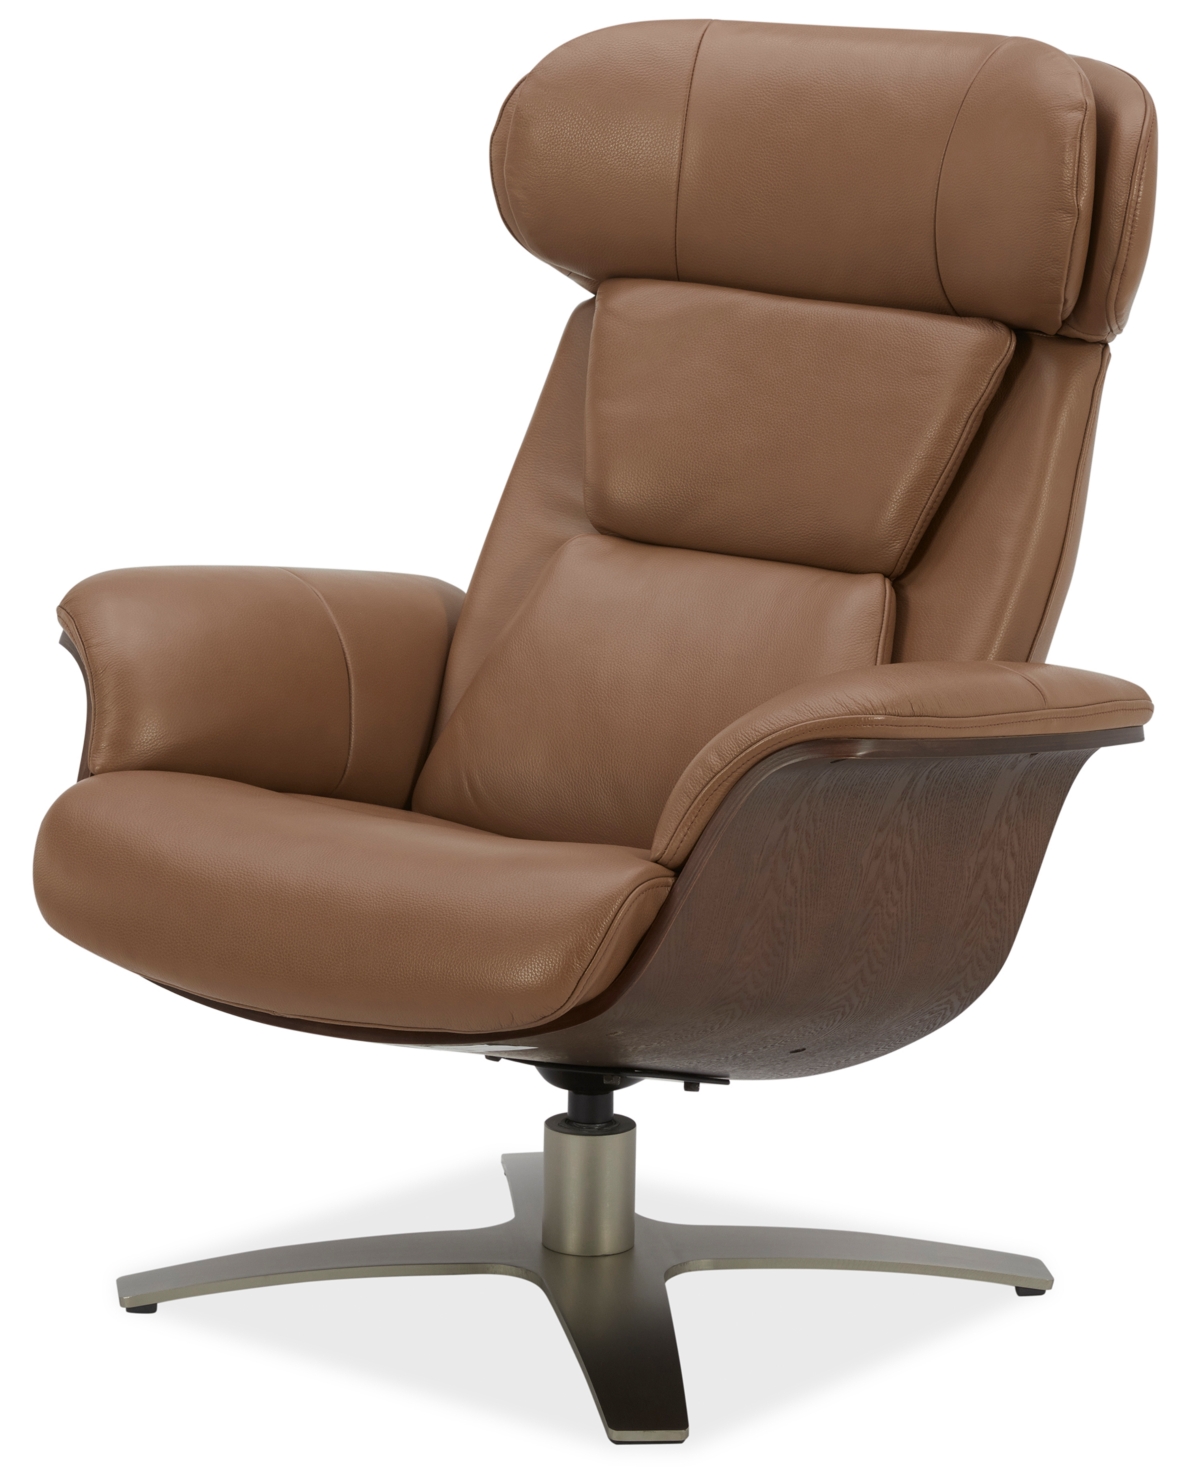 Furniture Janer Leather Swivel Chair, Created For Macy's In Butternut